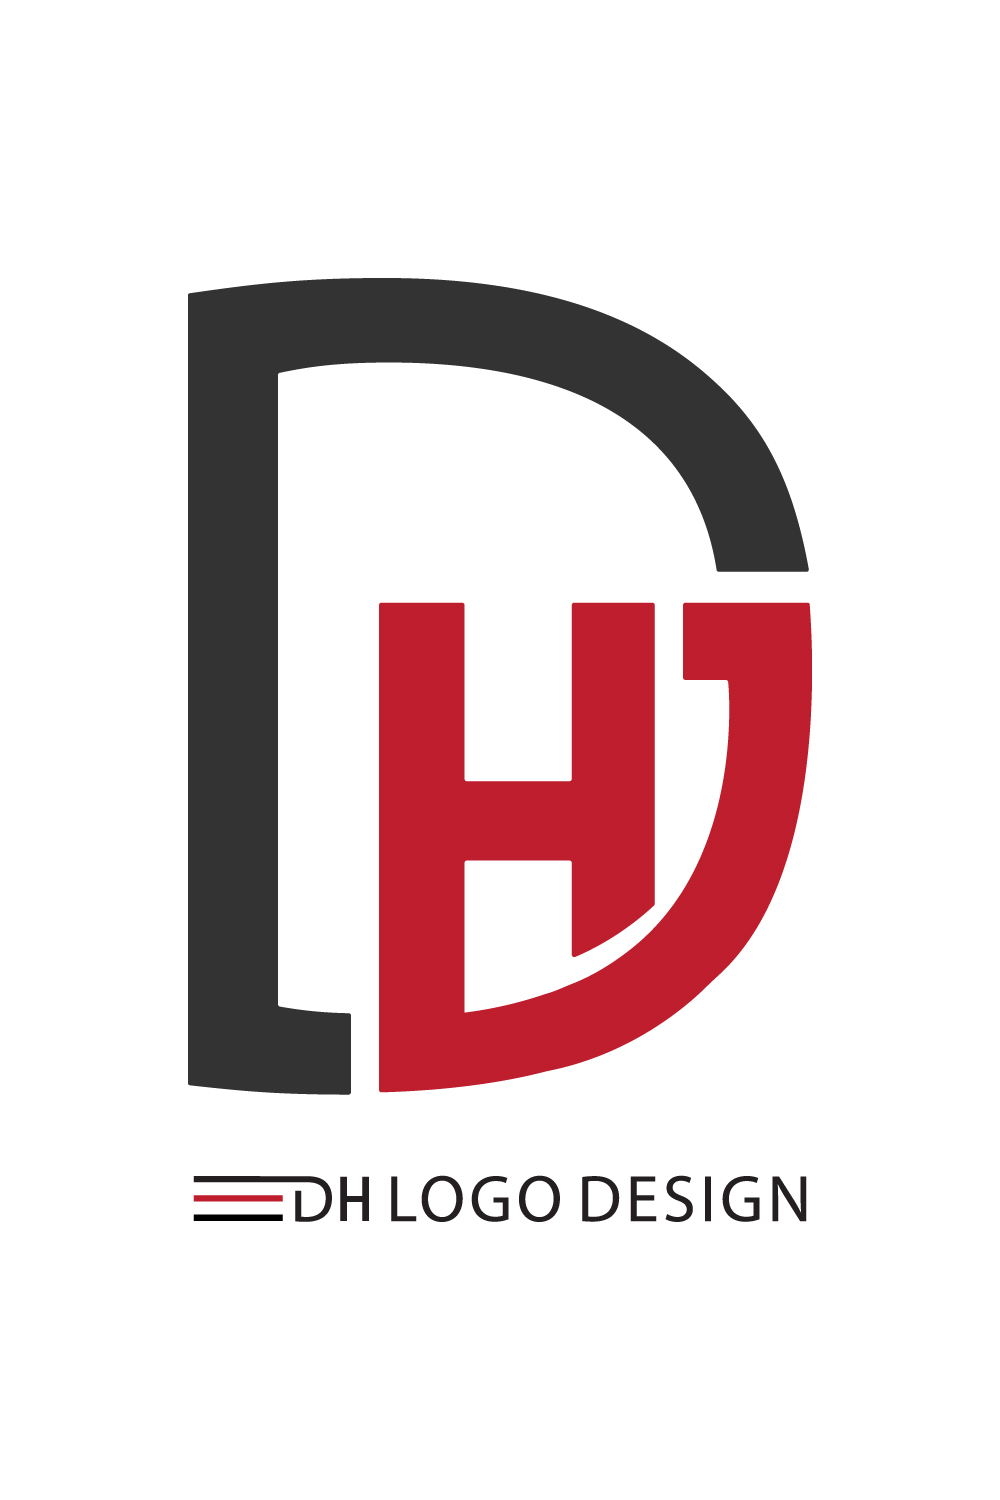 Initials DH letters logo design DH logo vector template image design HR logo red and black color icon design HD logo logo monogram best company identity pinterest preview image.